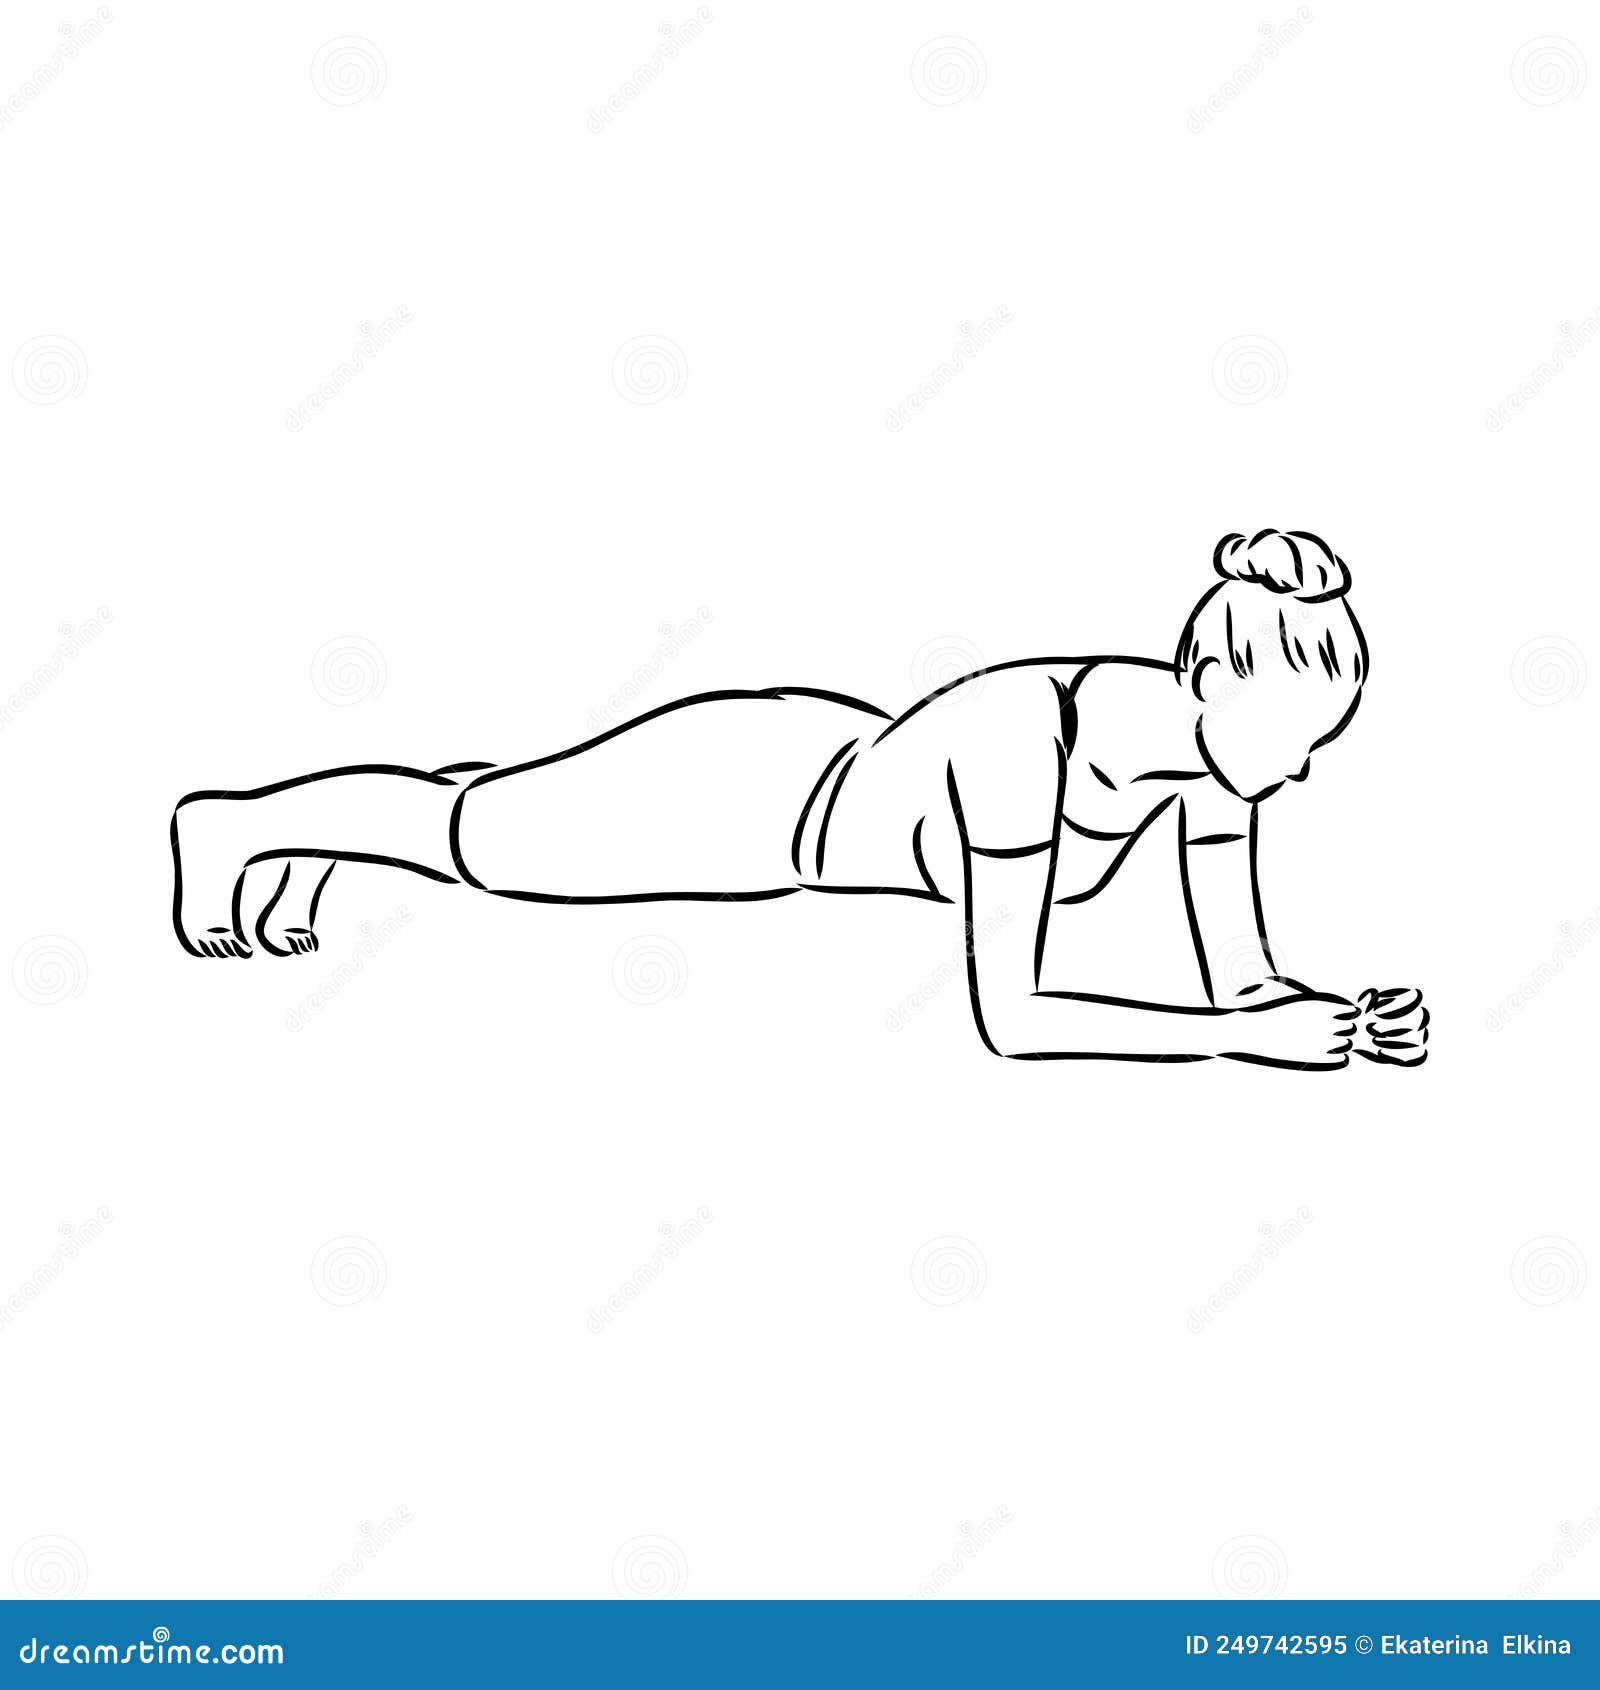 SUP Yoga Tips: How To Do a Reverse Plank Pose » Starboard SUP